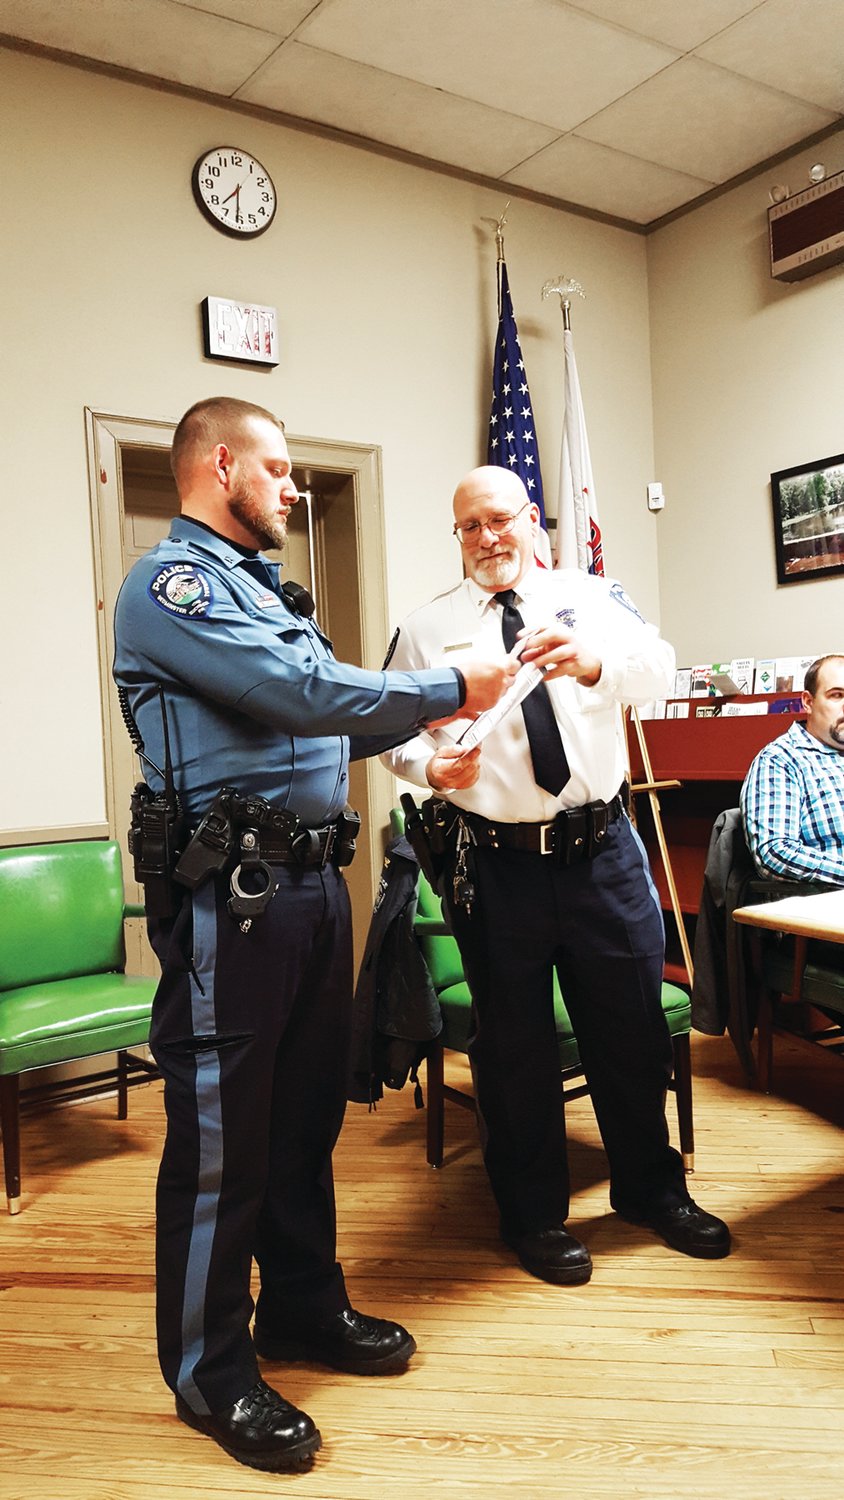 Bedminster Patrolman Nick Virnelson received the township’s Life Saving Award from Chief Mark Ofner at the Nov. 13 board of supervisors meeting. Ofner told how Virnelson saved the life of a resident heroin overdose victim, by first reviving him, and then having to do it again, while coping with a violent response from the victim. Photograph by Cliff Lebowitz.